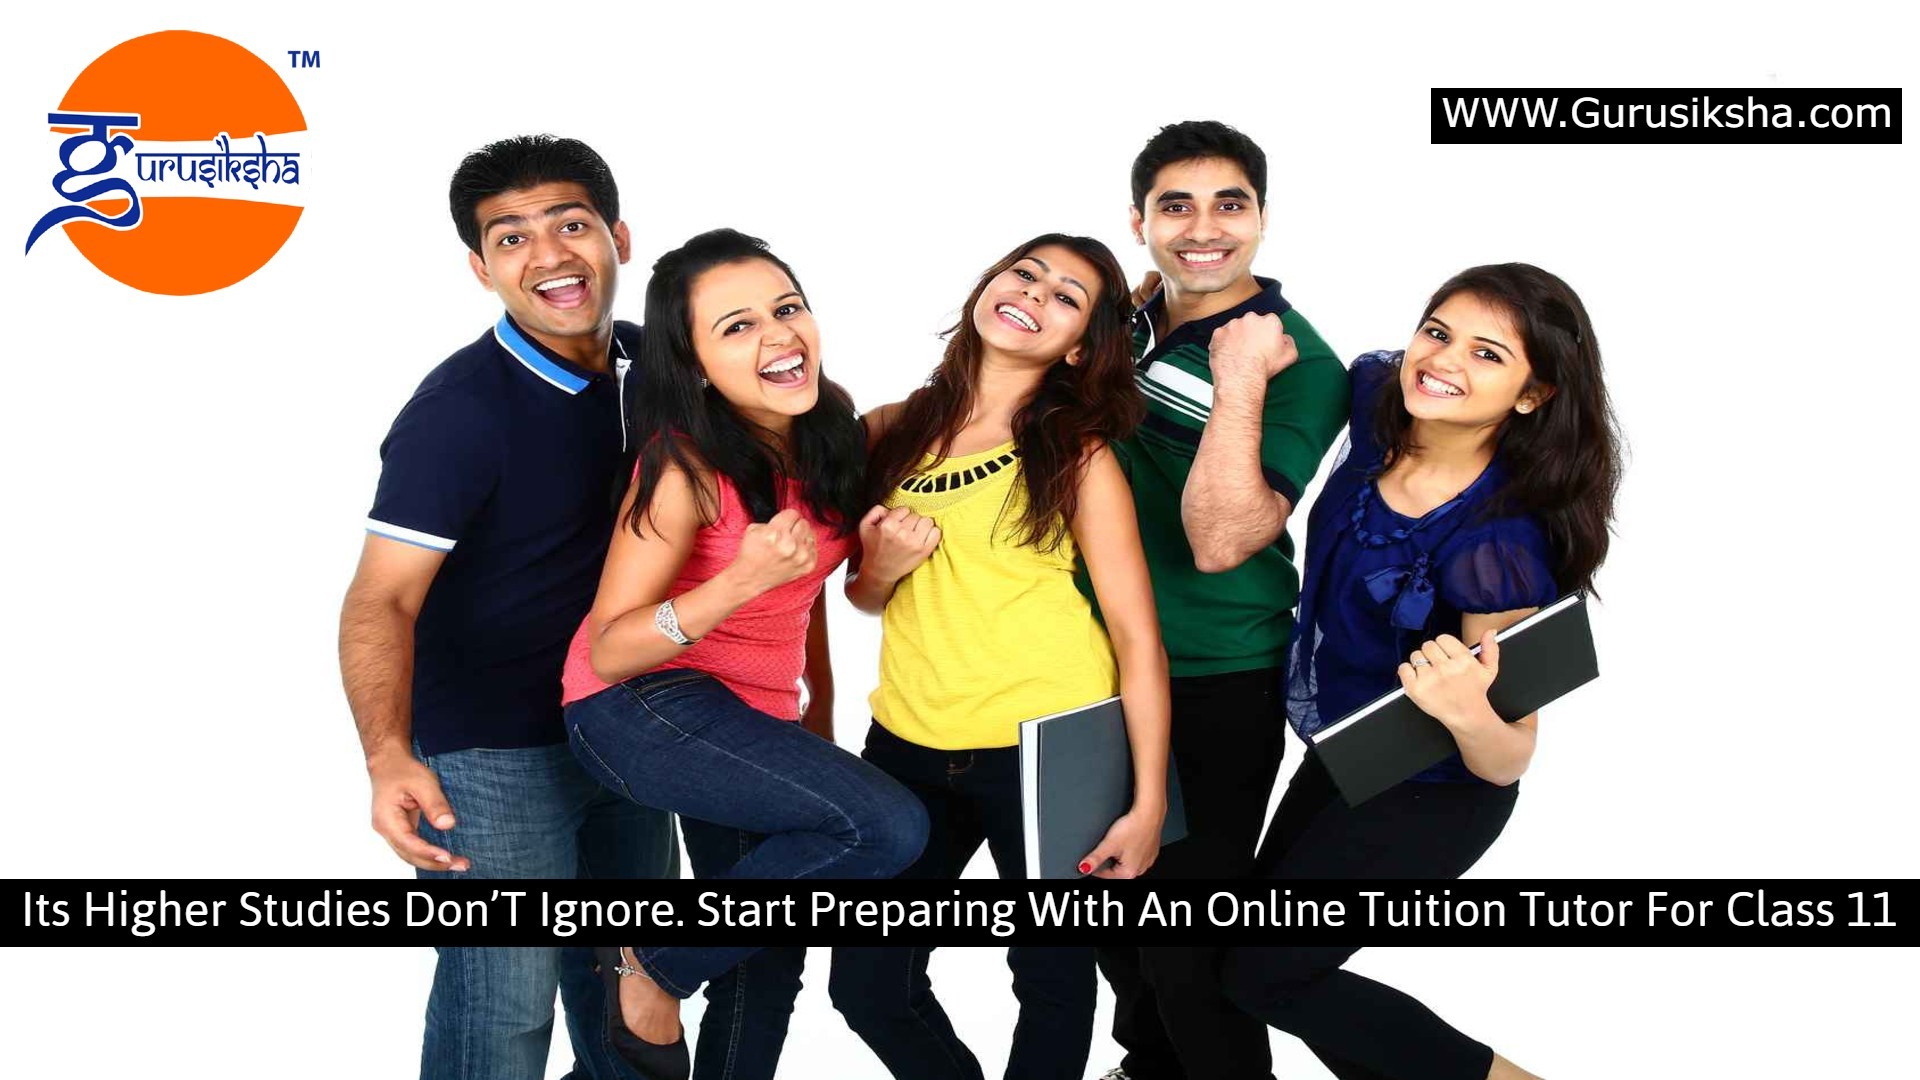 Its Higher Studies Don’T Ignore. Start Preparing With An Online Tuition Tutor For Class 11